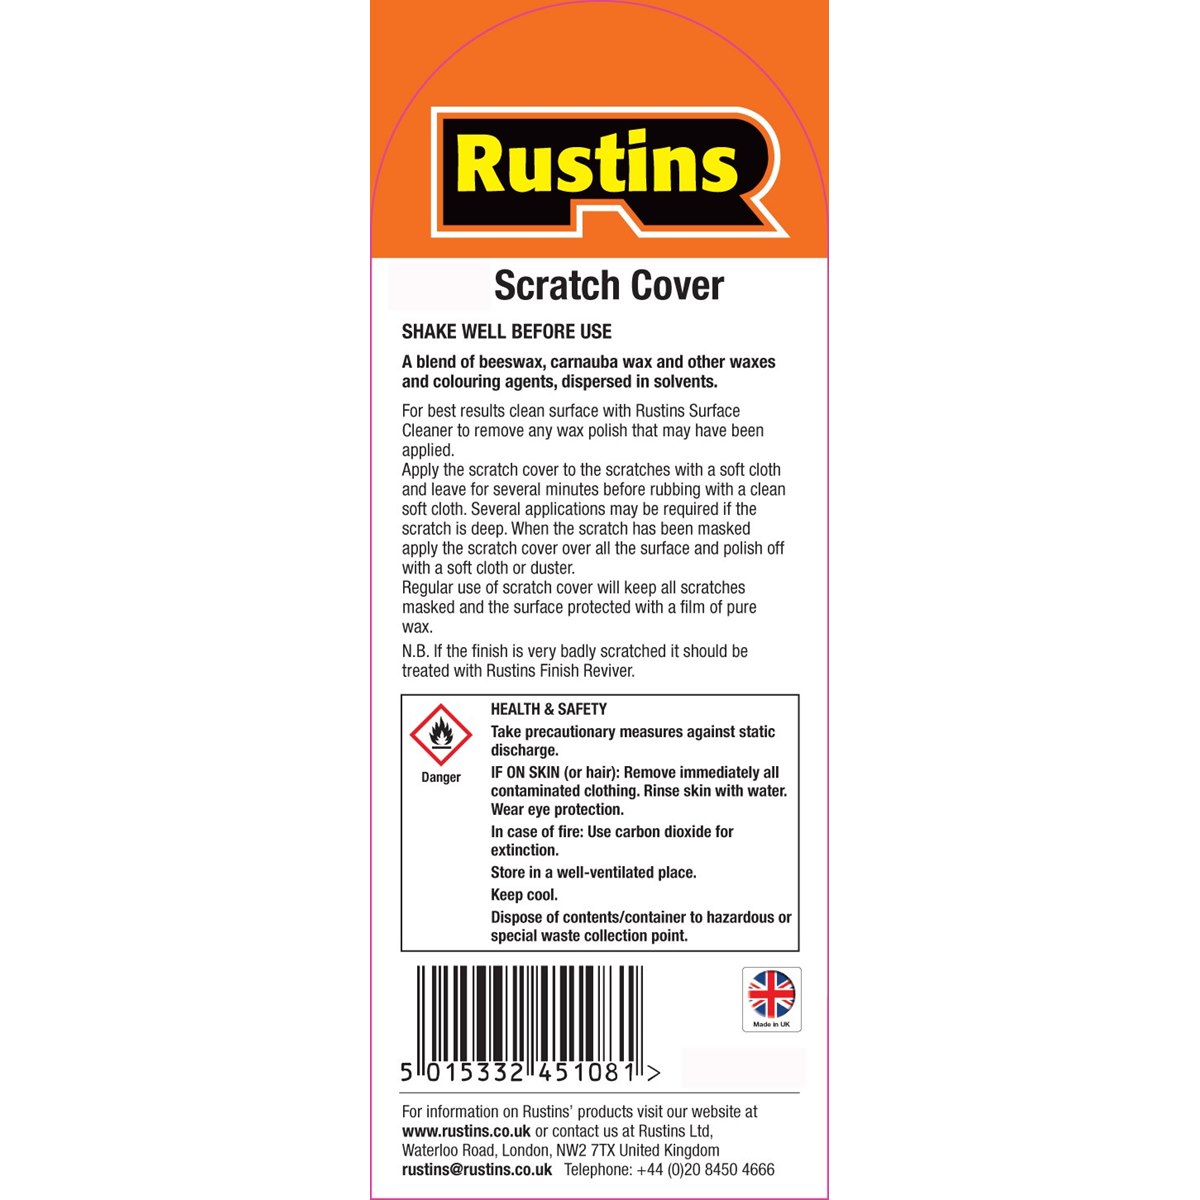 How to use Rustins Scratch Cover